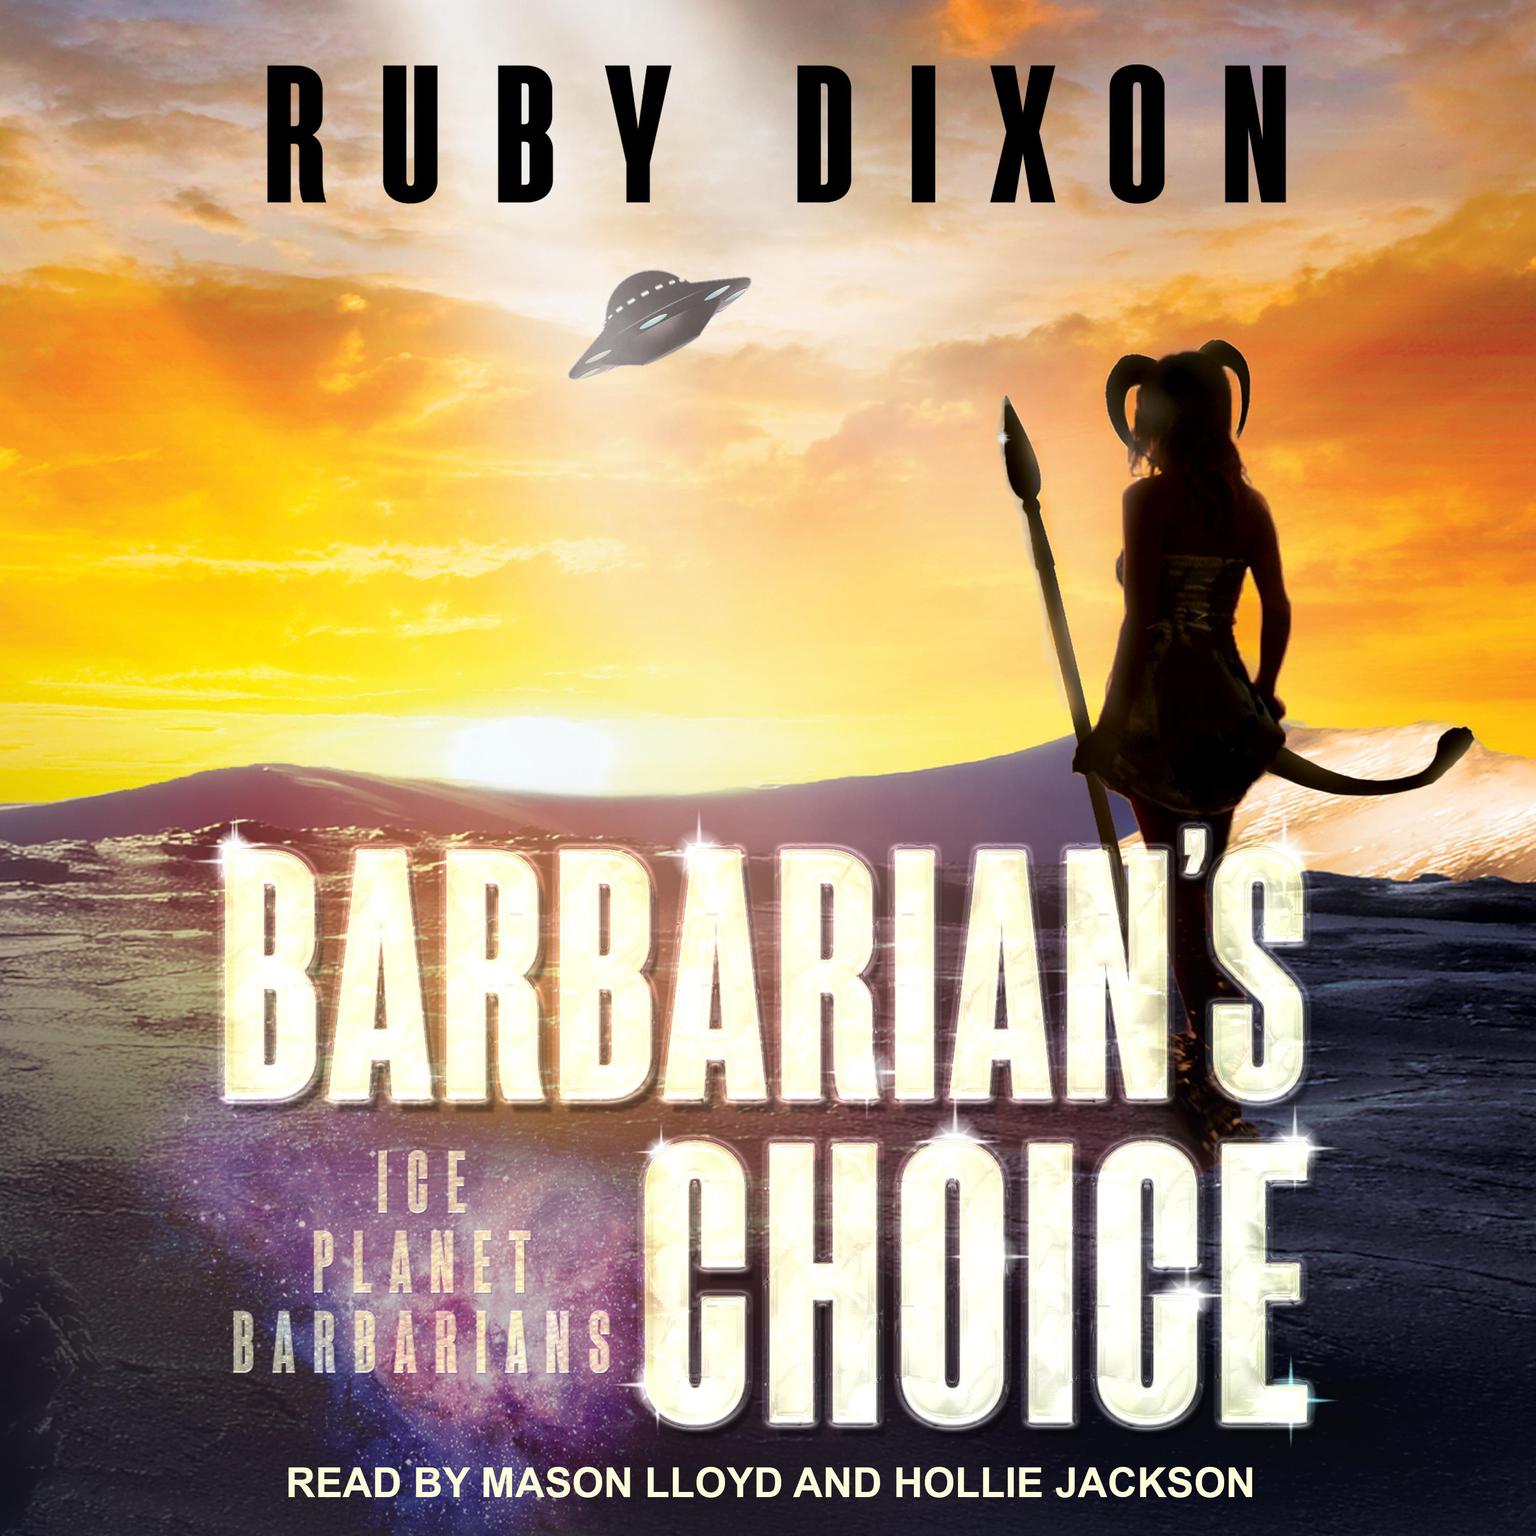 Barbarians Choice: Ice Planet Barbarians Audiobook, by Ruby Dixon